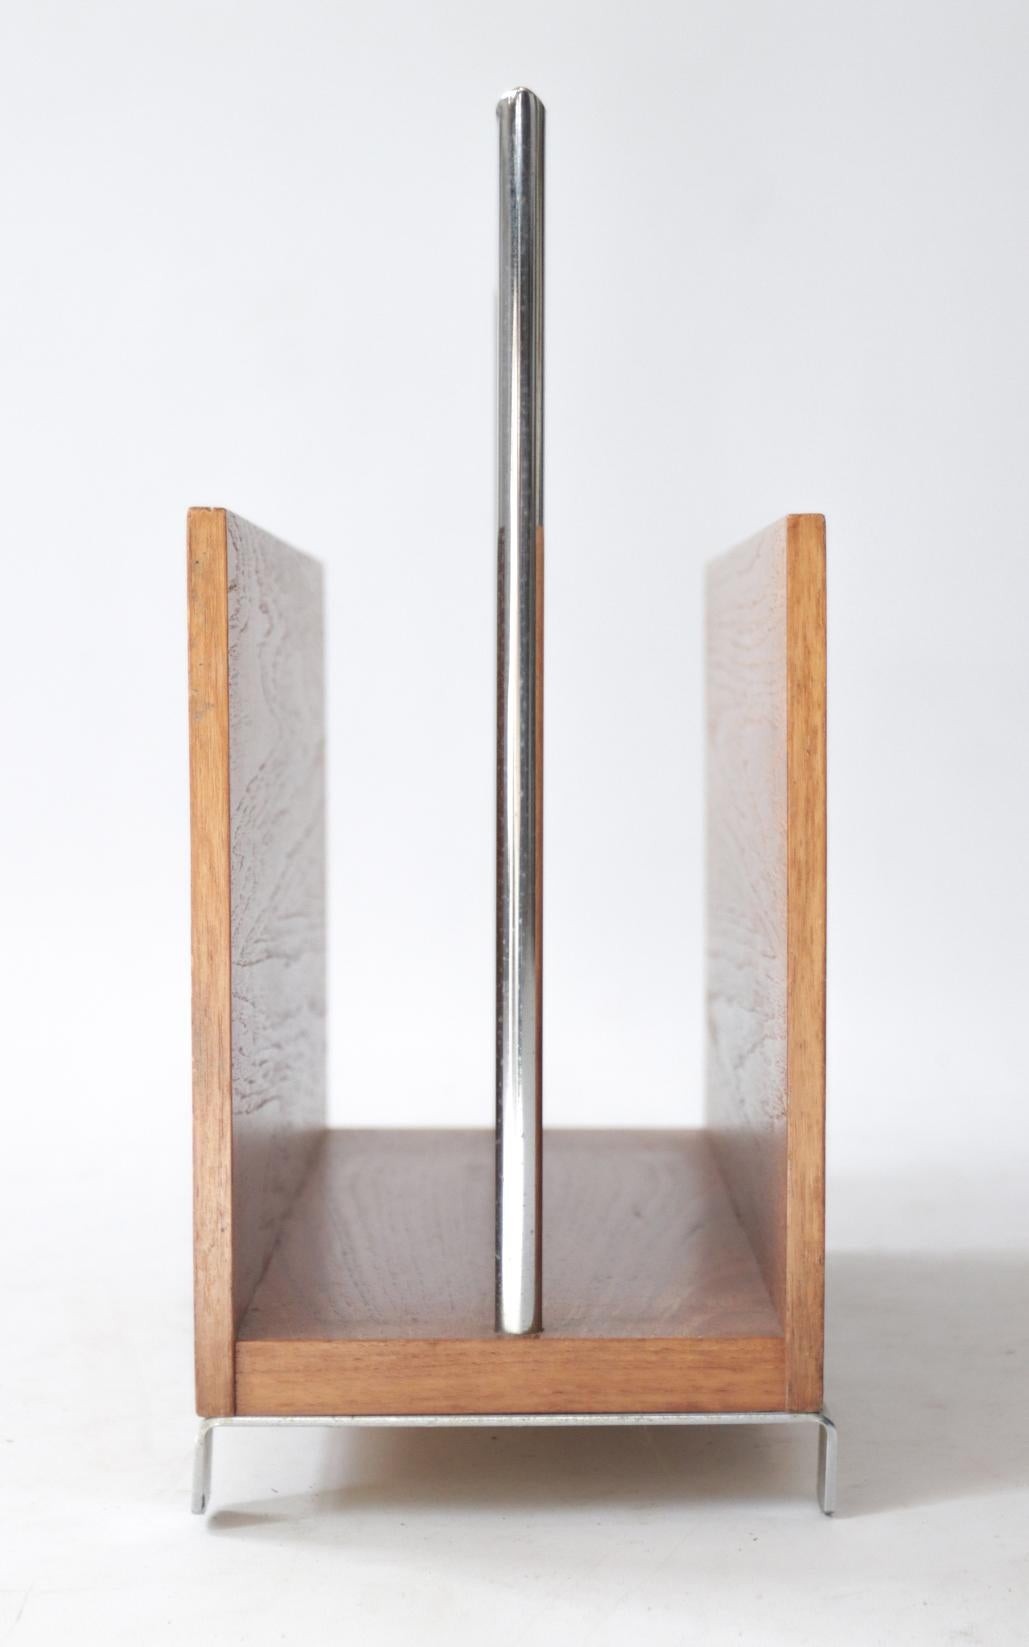 Sleek magazine rack made of teak (veneer) and chrome-plated metal from the 1960s.

The chrome has some small spots, the teak veneer is in a very nice condition considering its age.